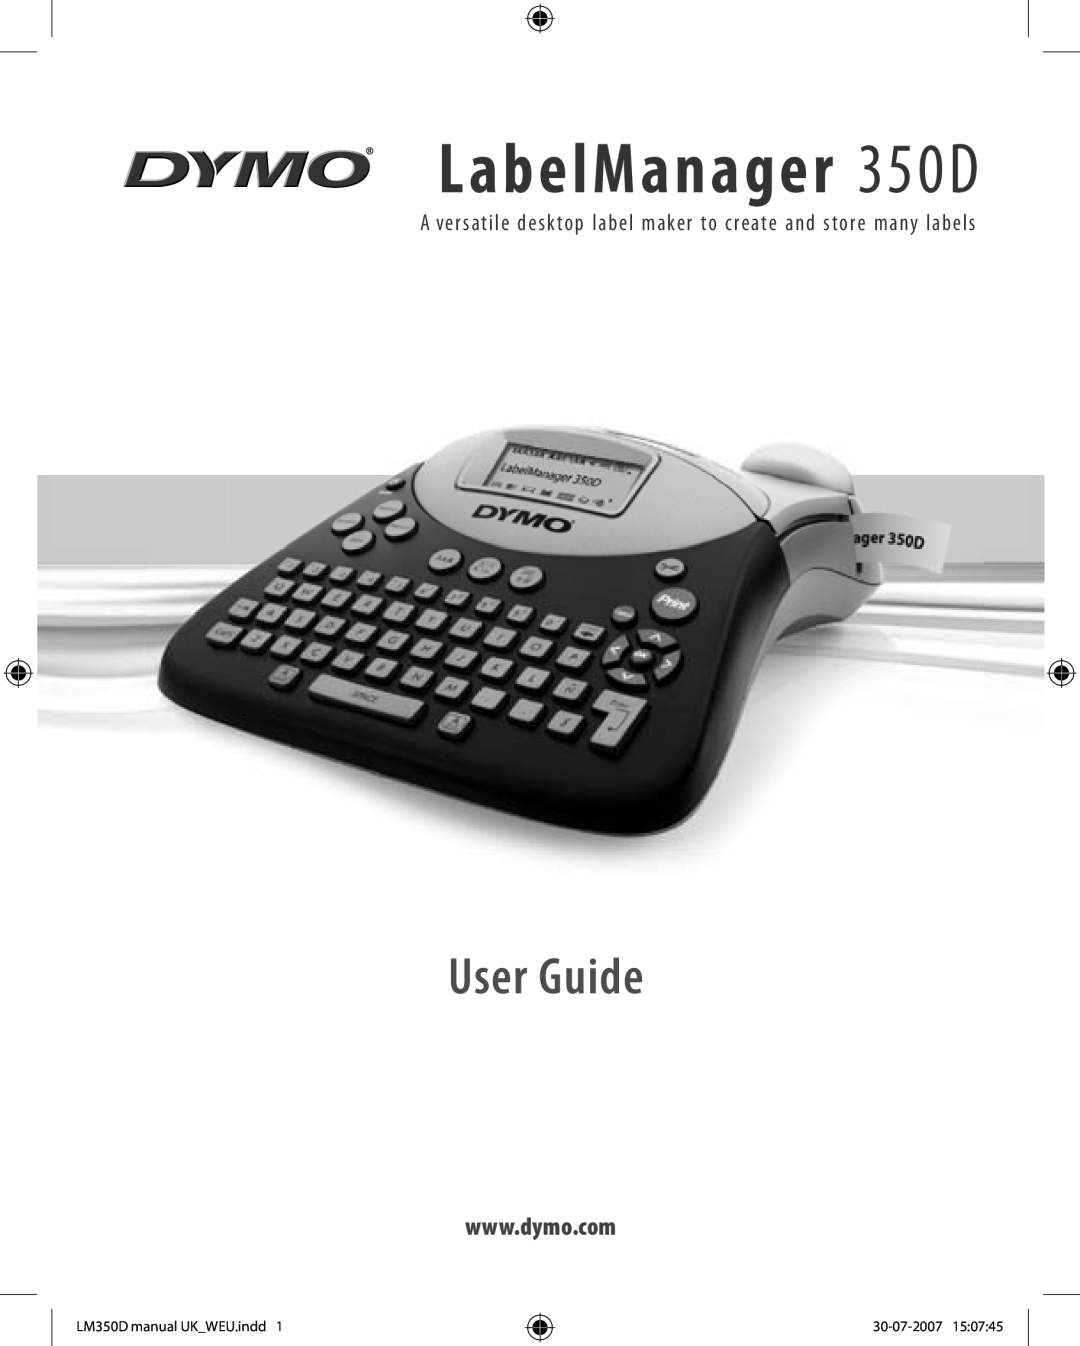 Dymo 350D manual LabelManager 350 D, User Guide, A ver s atile desk top label maker to create and s tore many labels 